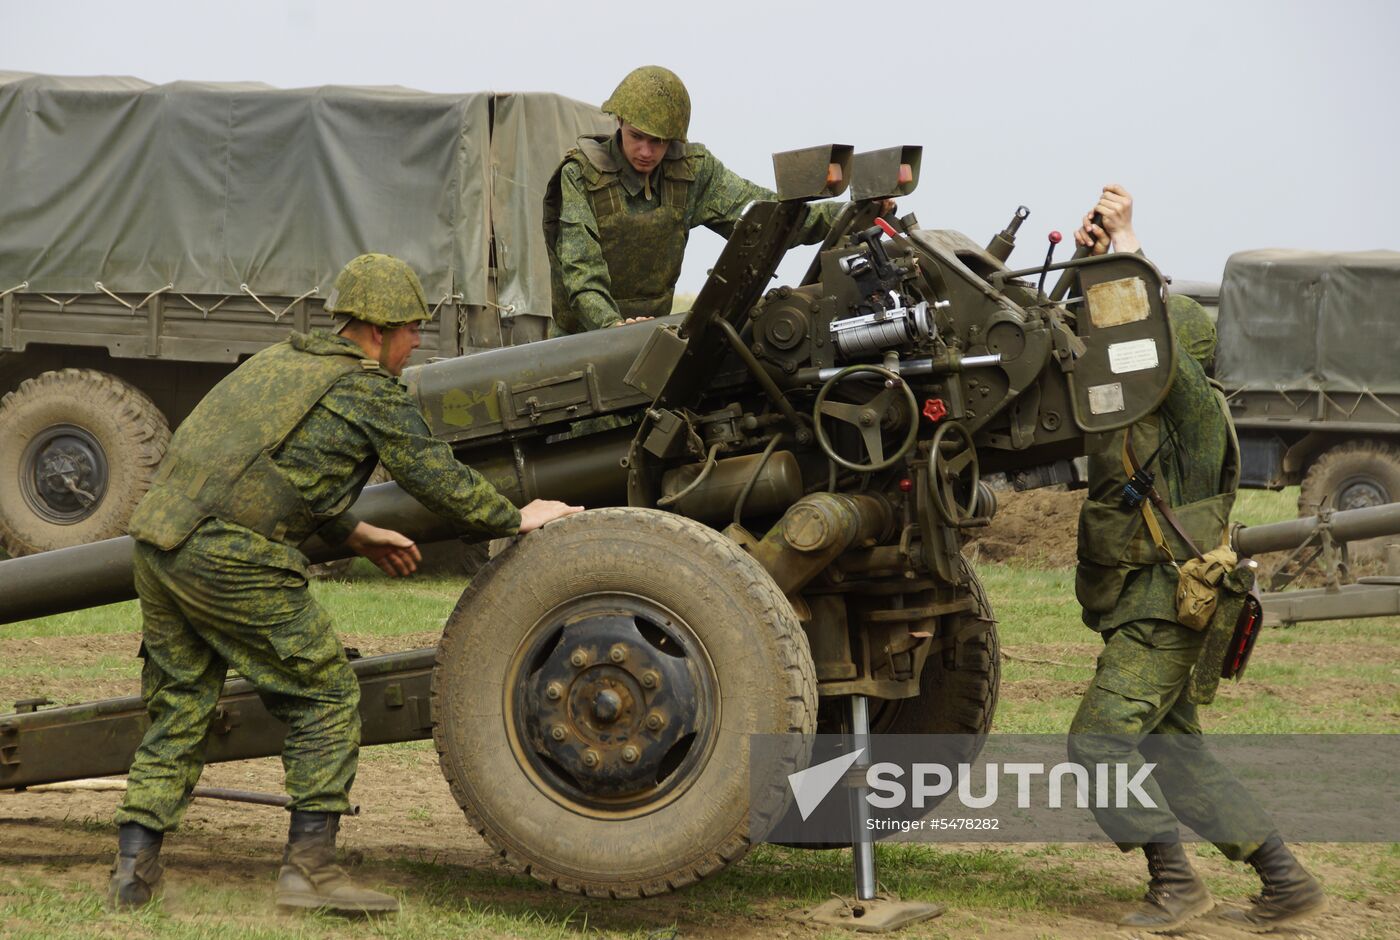 Firearms drill of the People's Militia of the Lugansk People's Republic